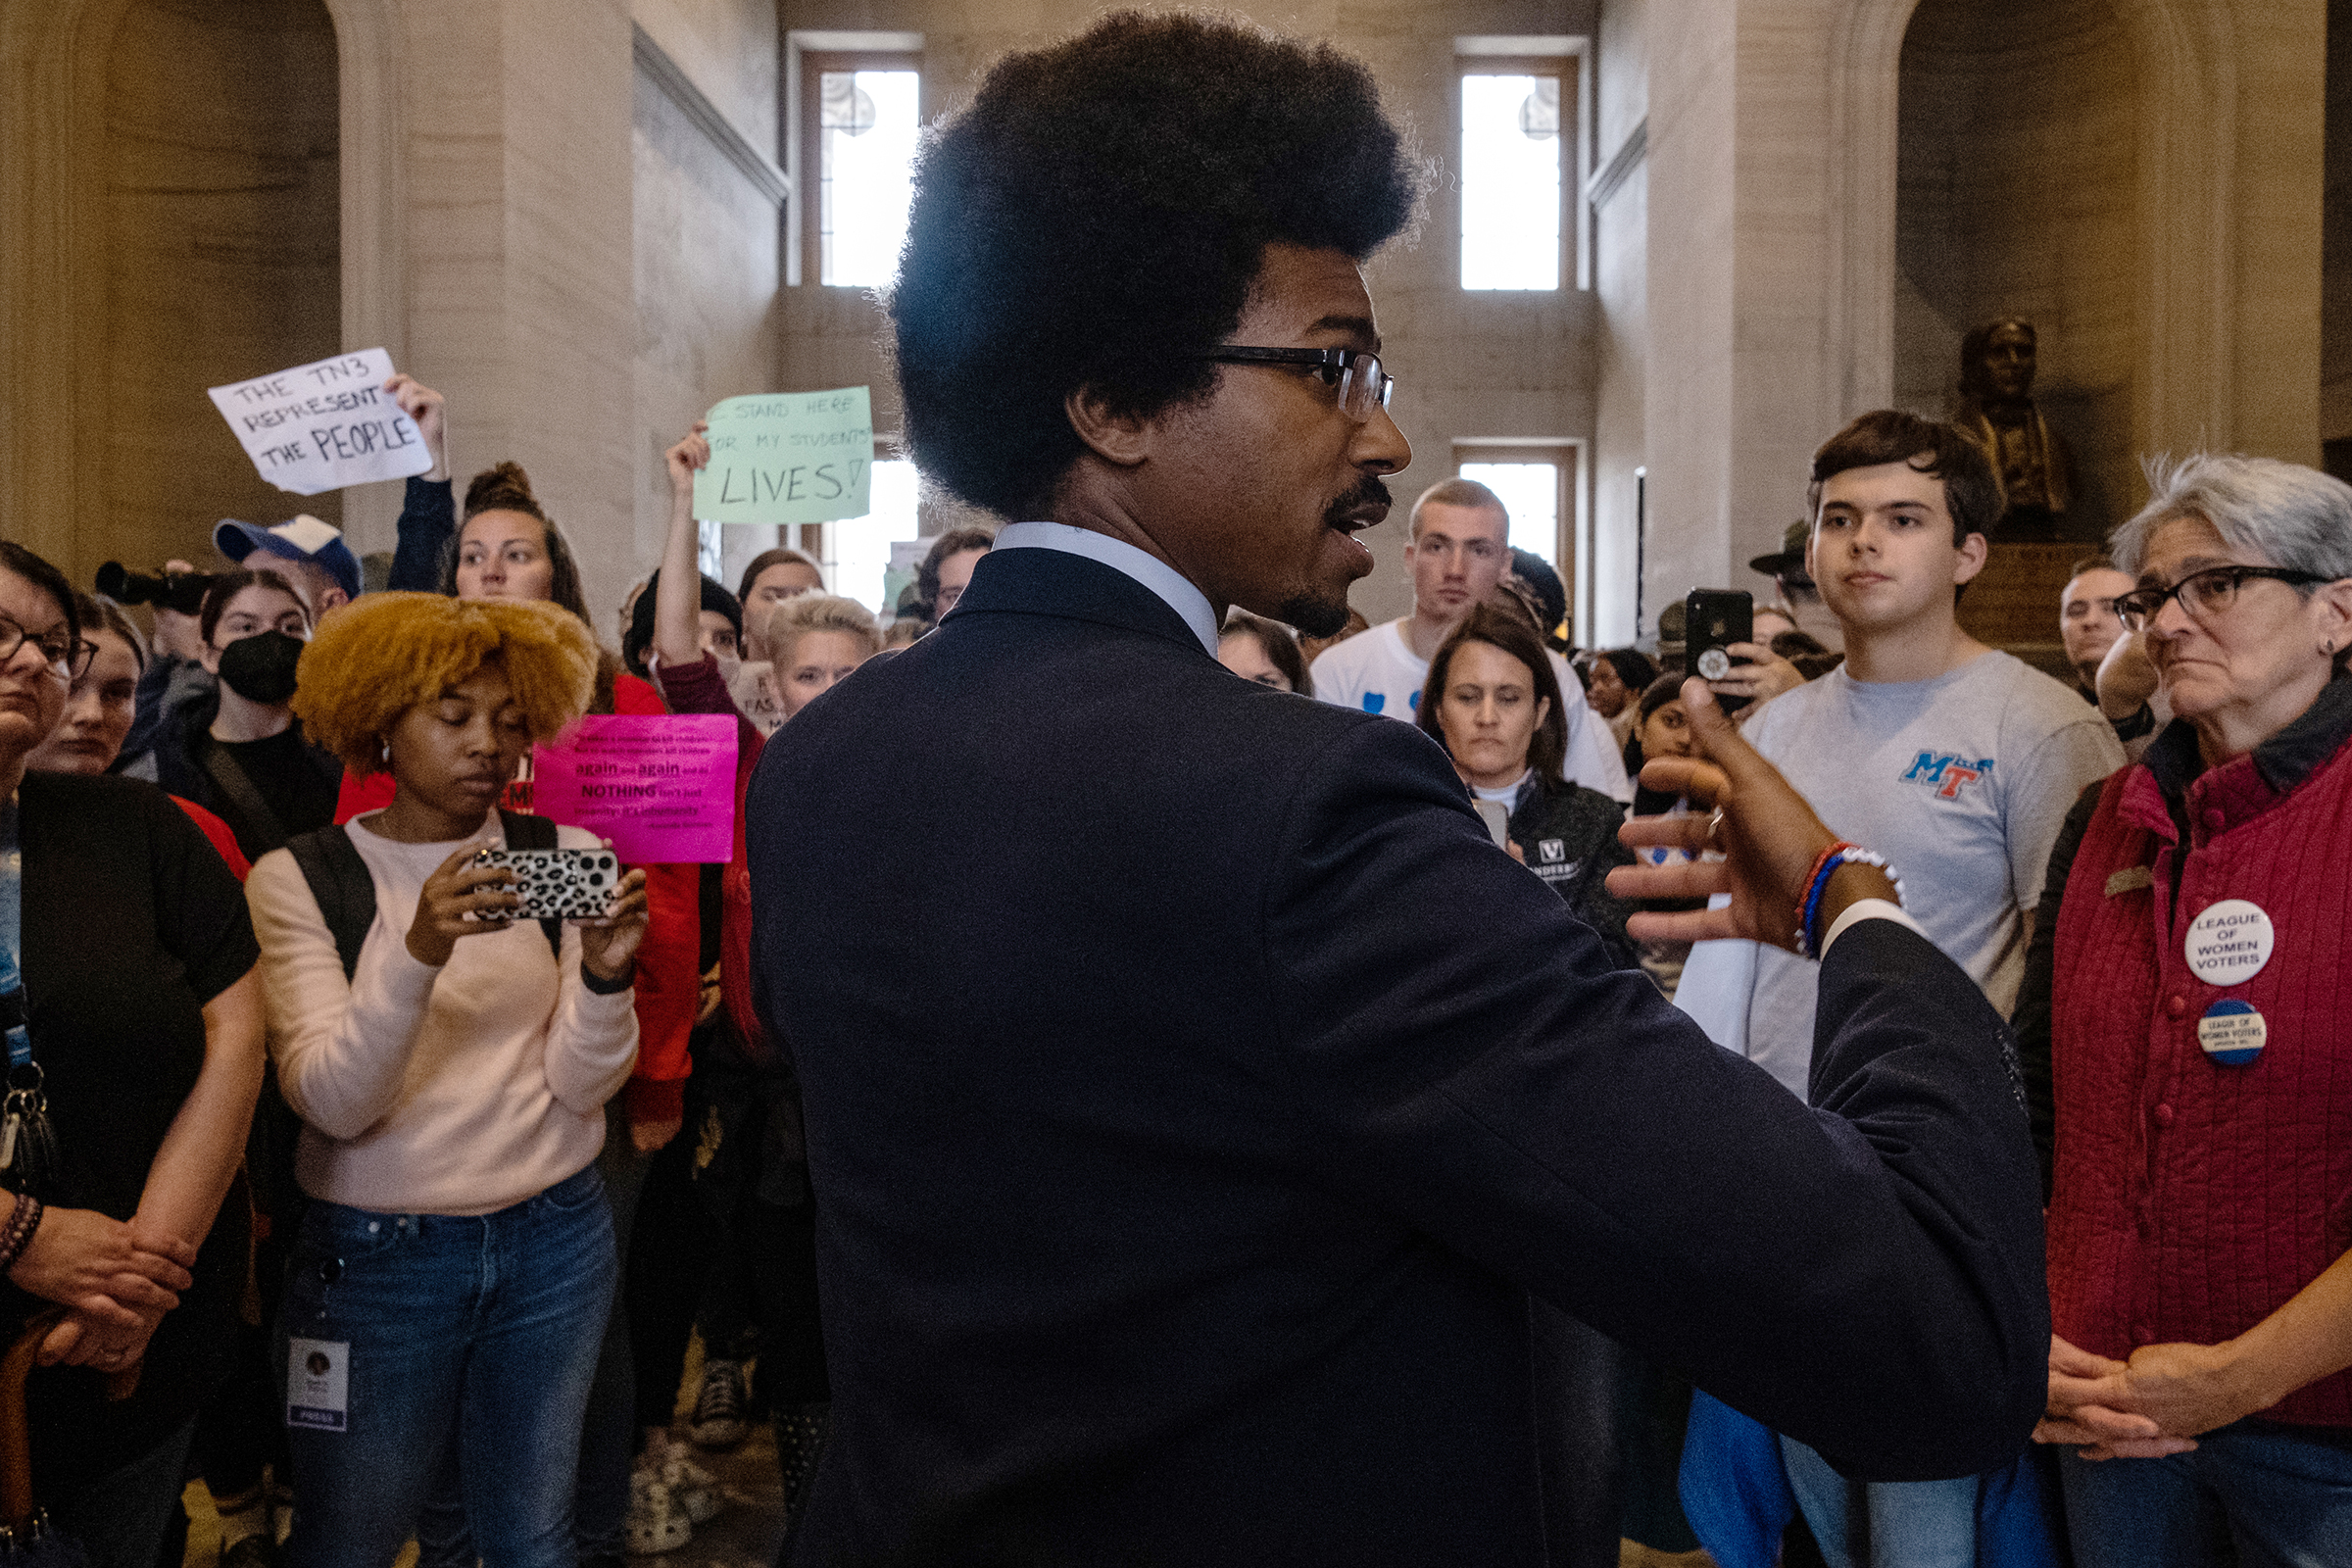 Democratic state Rep. Justin Pearson of Memphis speaks with supporters after being expelled from the state Legislature on April 6 in Nashville.